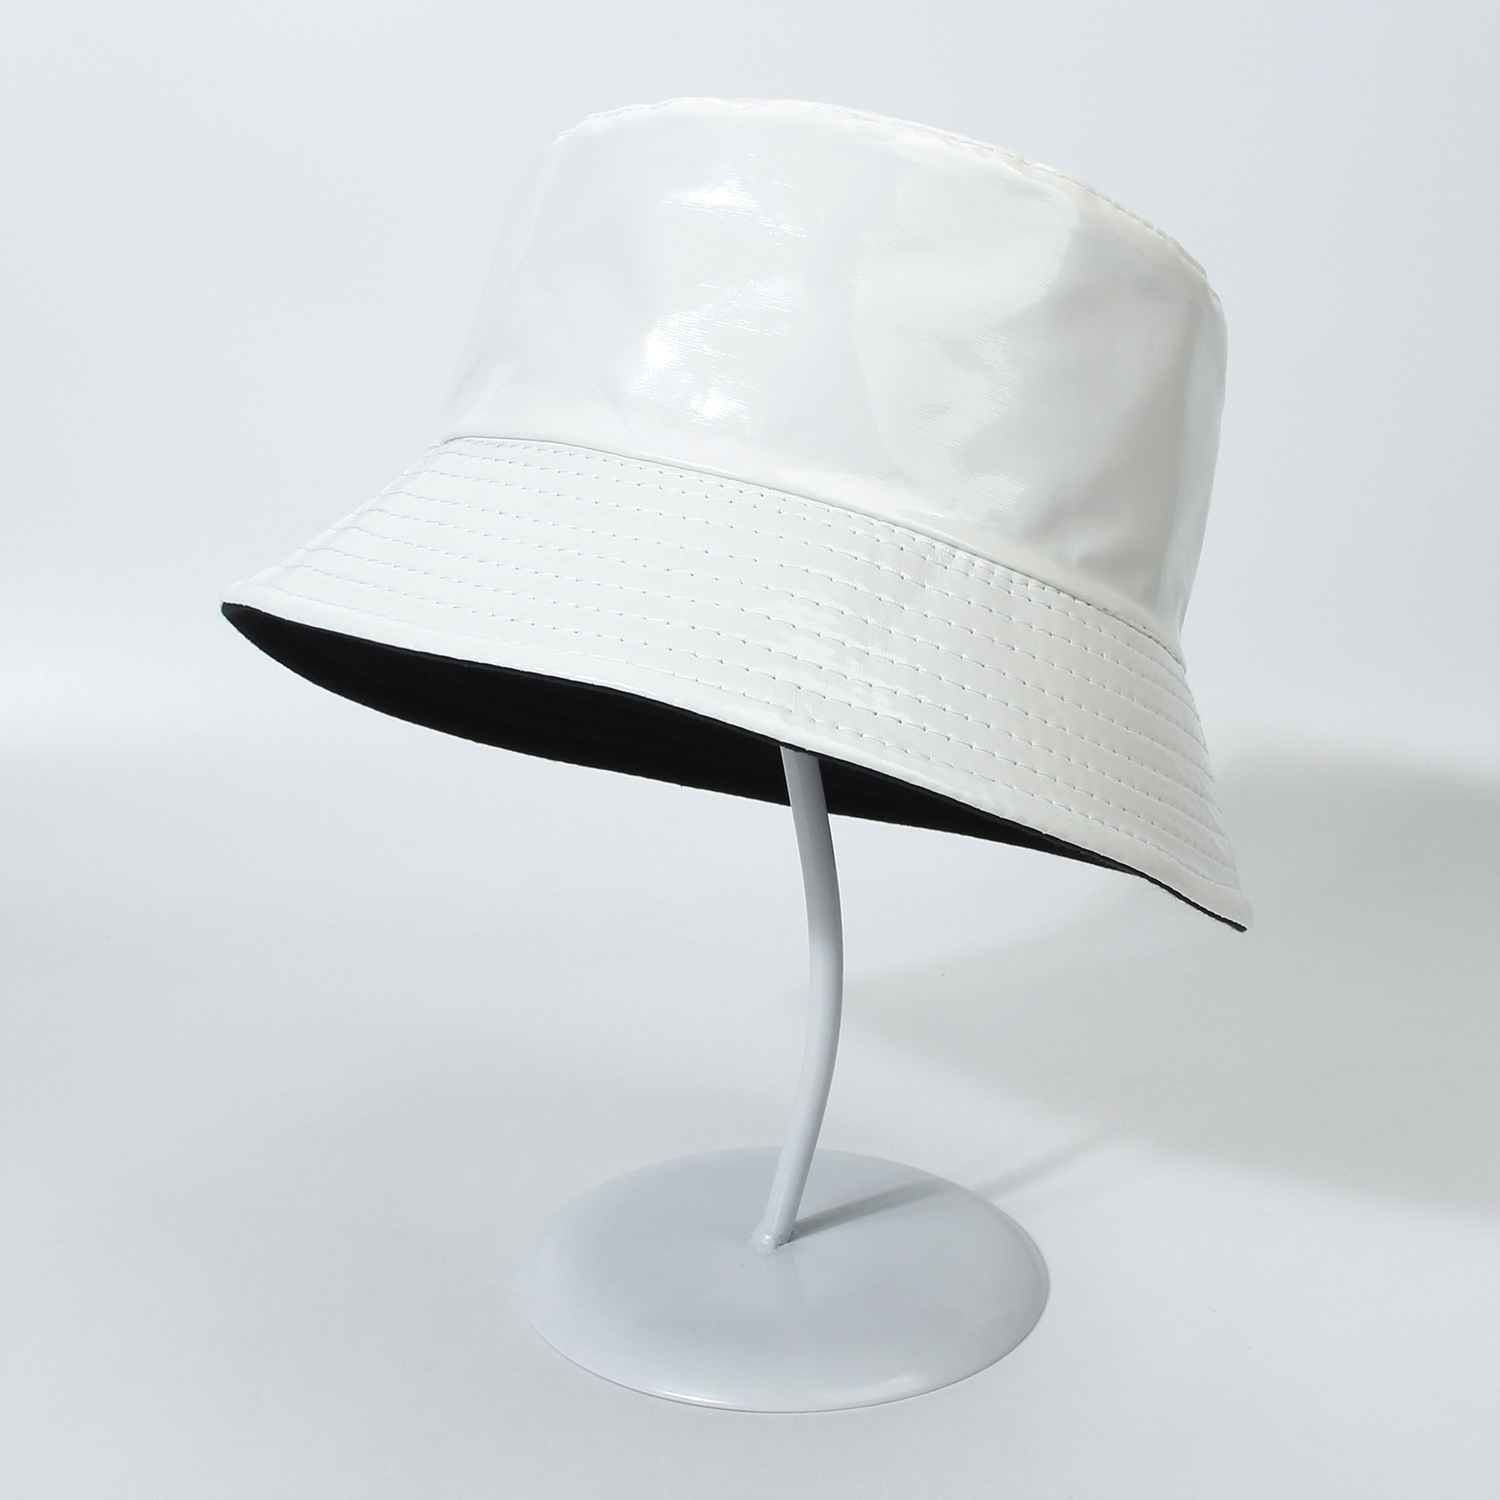 New Bright Leather Colorful Reversible Fisherman Hat Men's and Women's Outdoor Sun Protection Sun-Proof Basin Hat Foldable Outing Hat